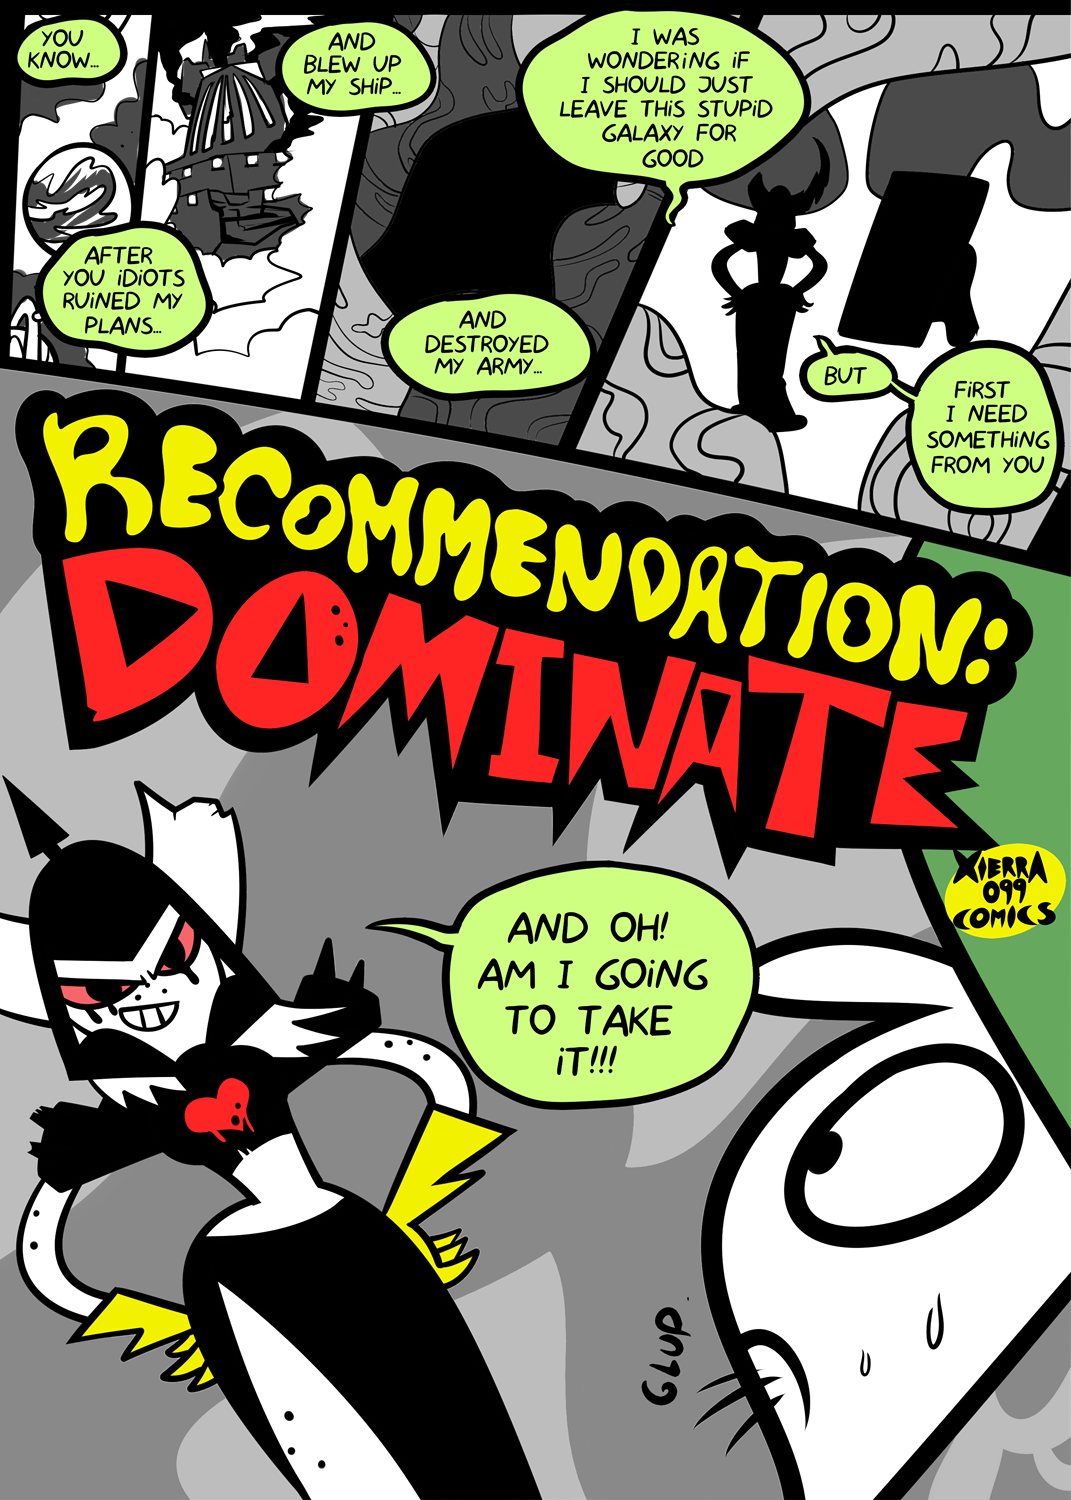 Recommendation: DOMINATE